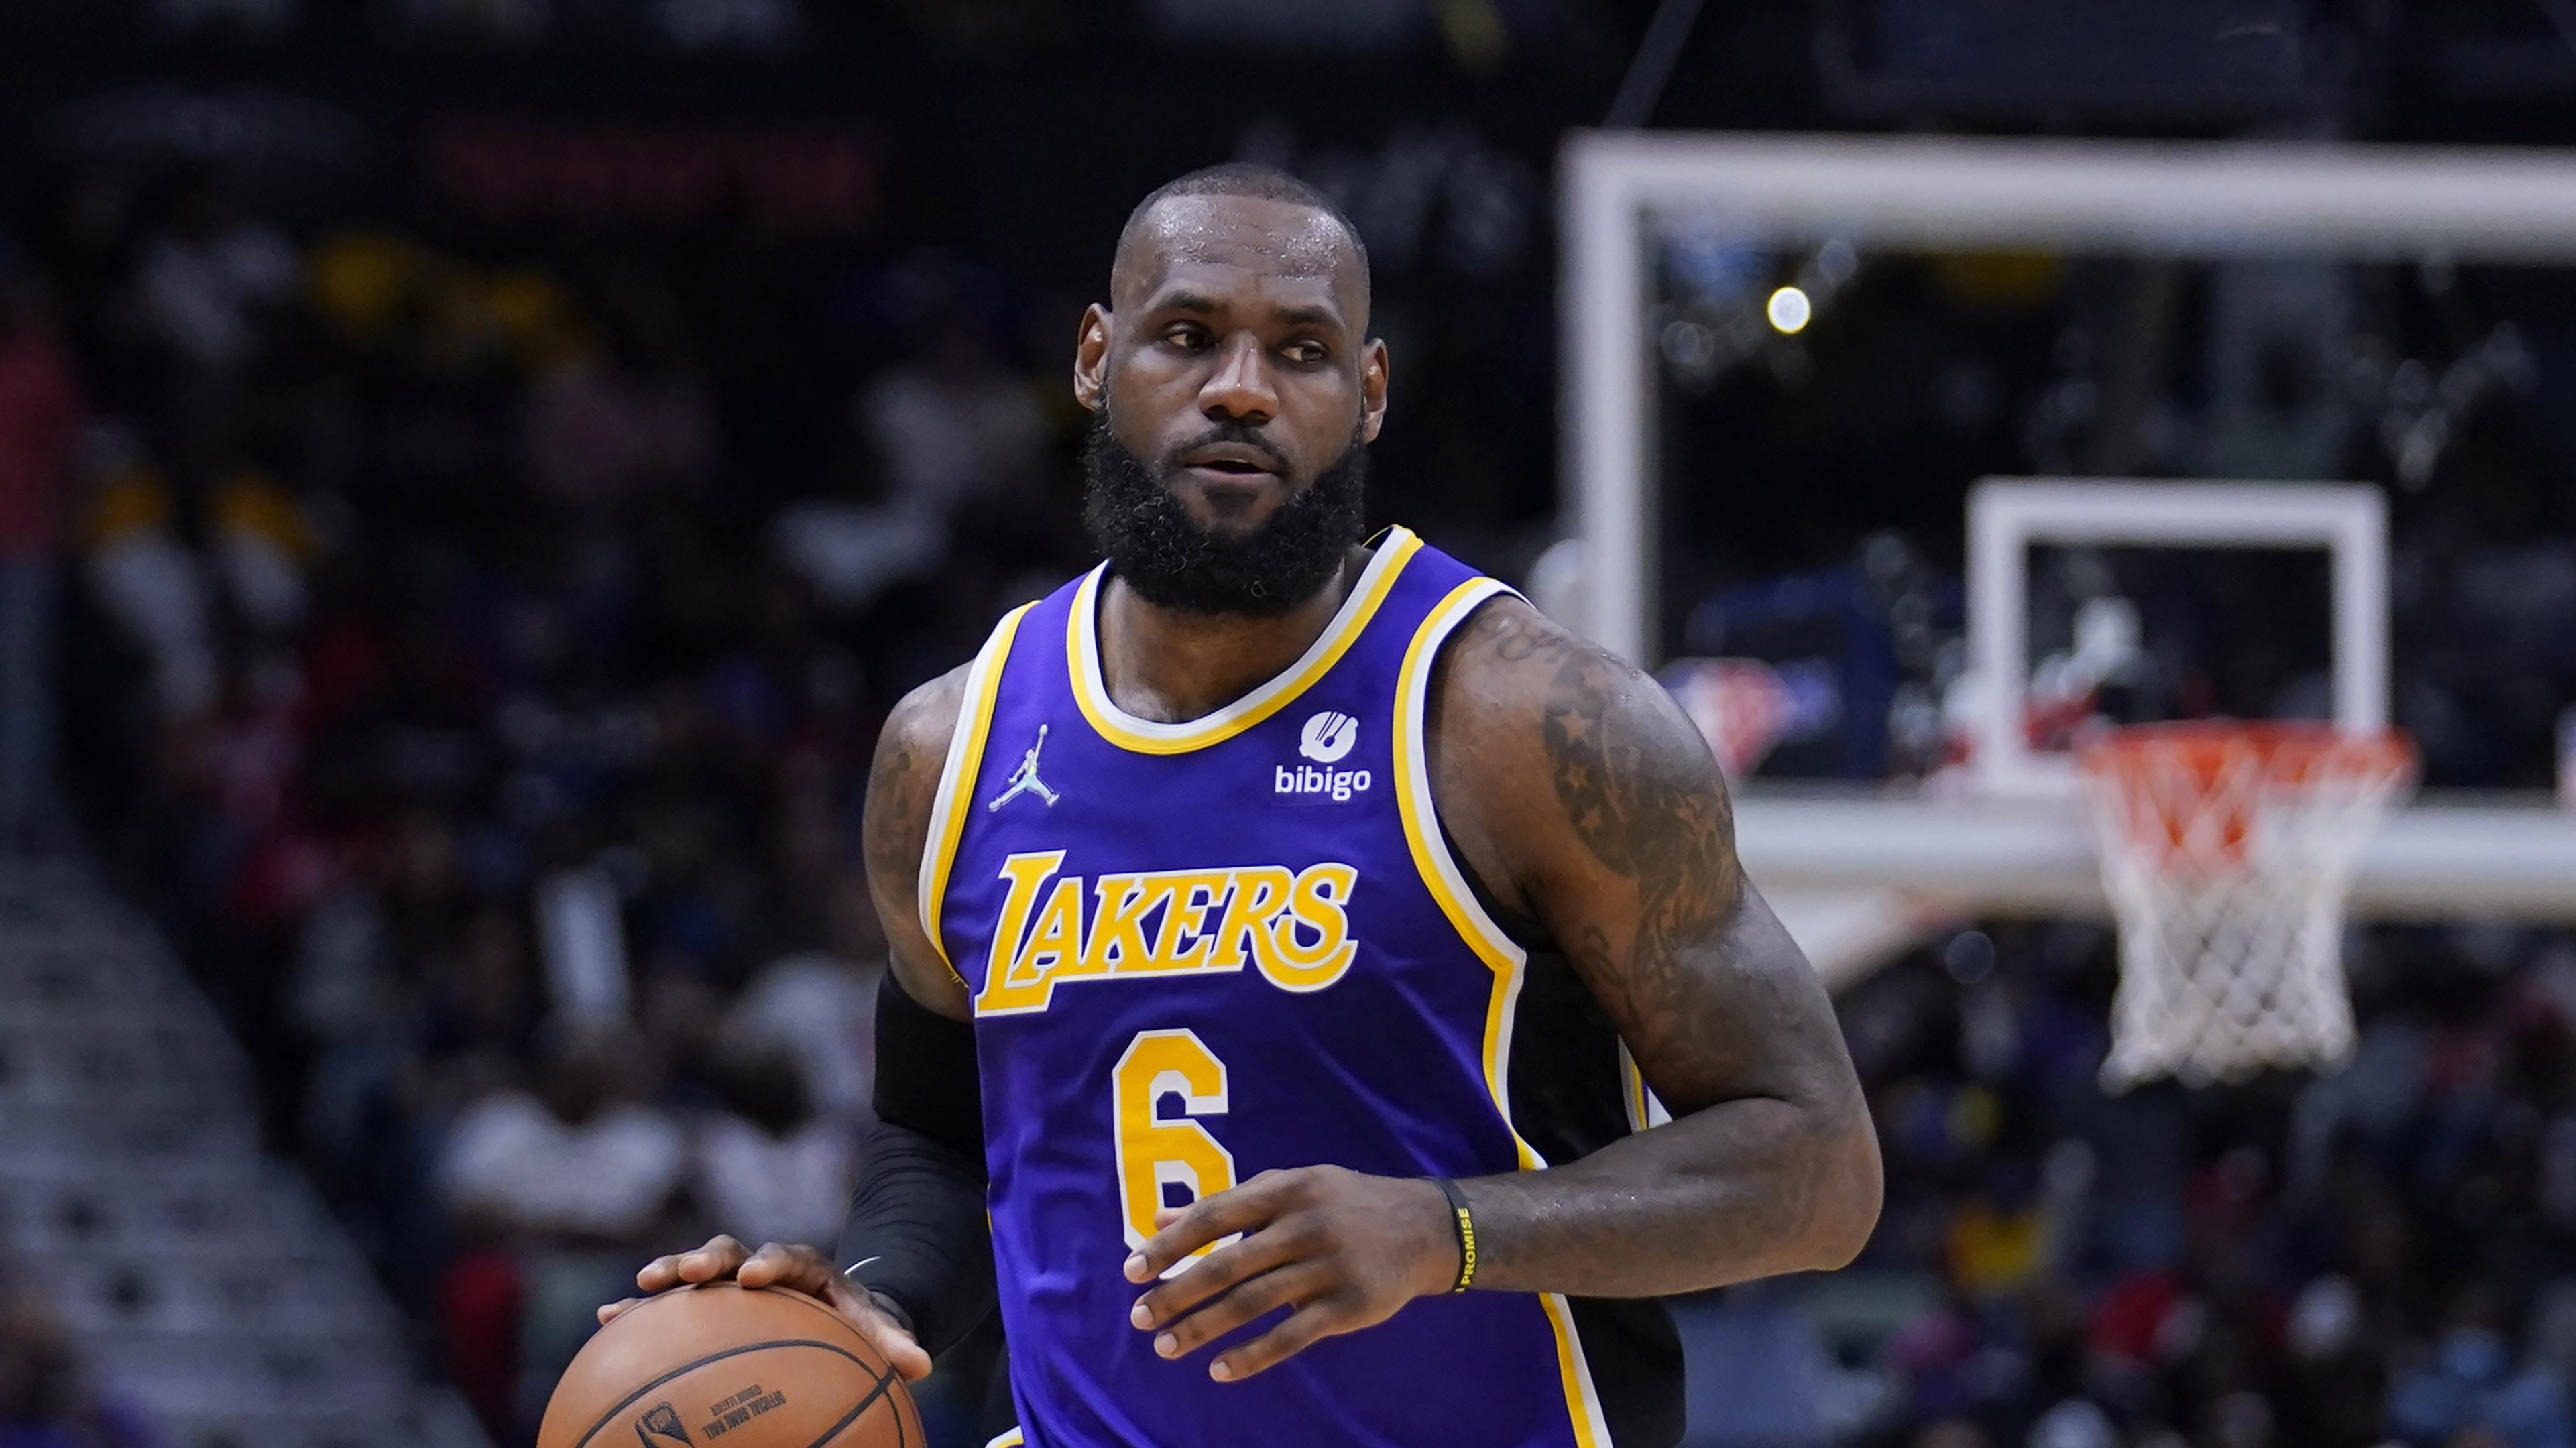 Lakers' LeBron James Out vs. Jazz with Ankle Injury; Will Miss 2nd Straight Game